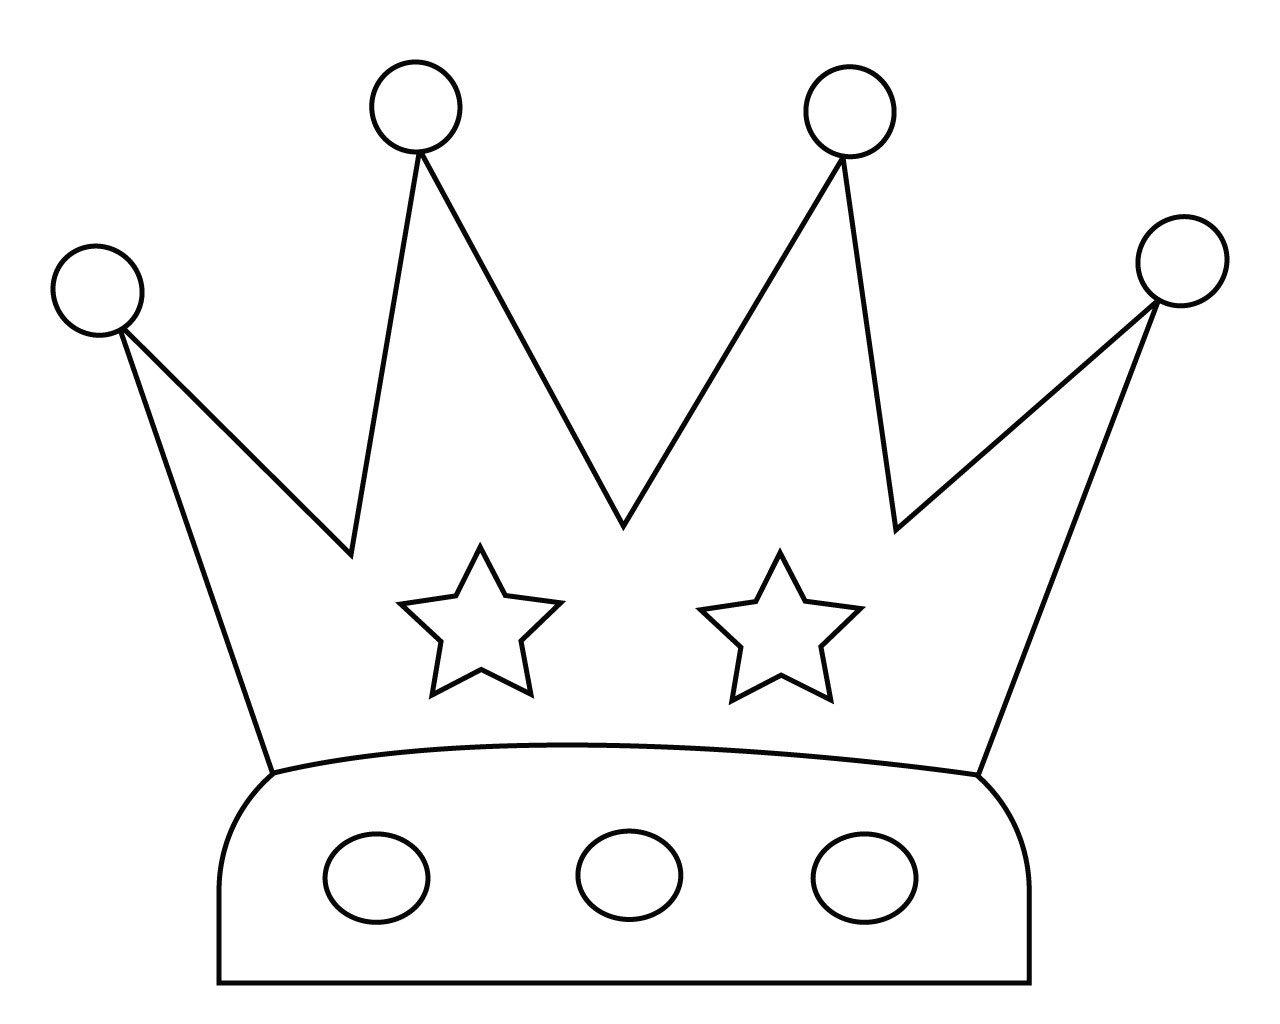 Crown Coloring Page To Print, Simple and Easy Pictures Free Coloring